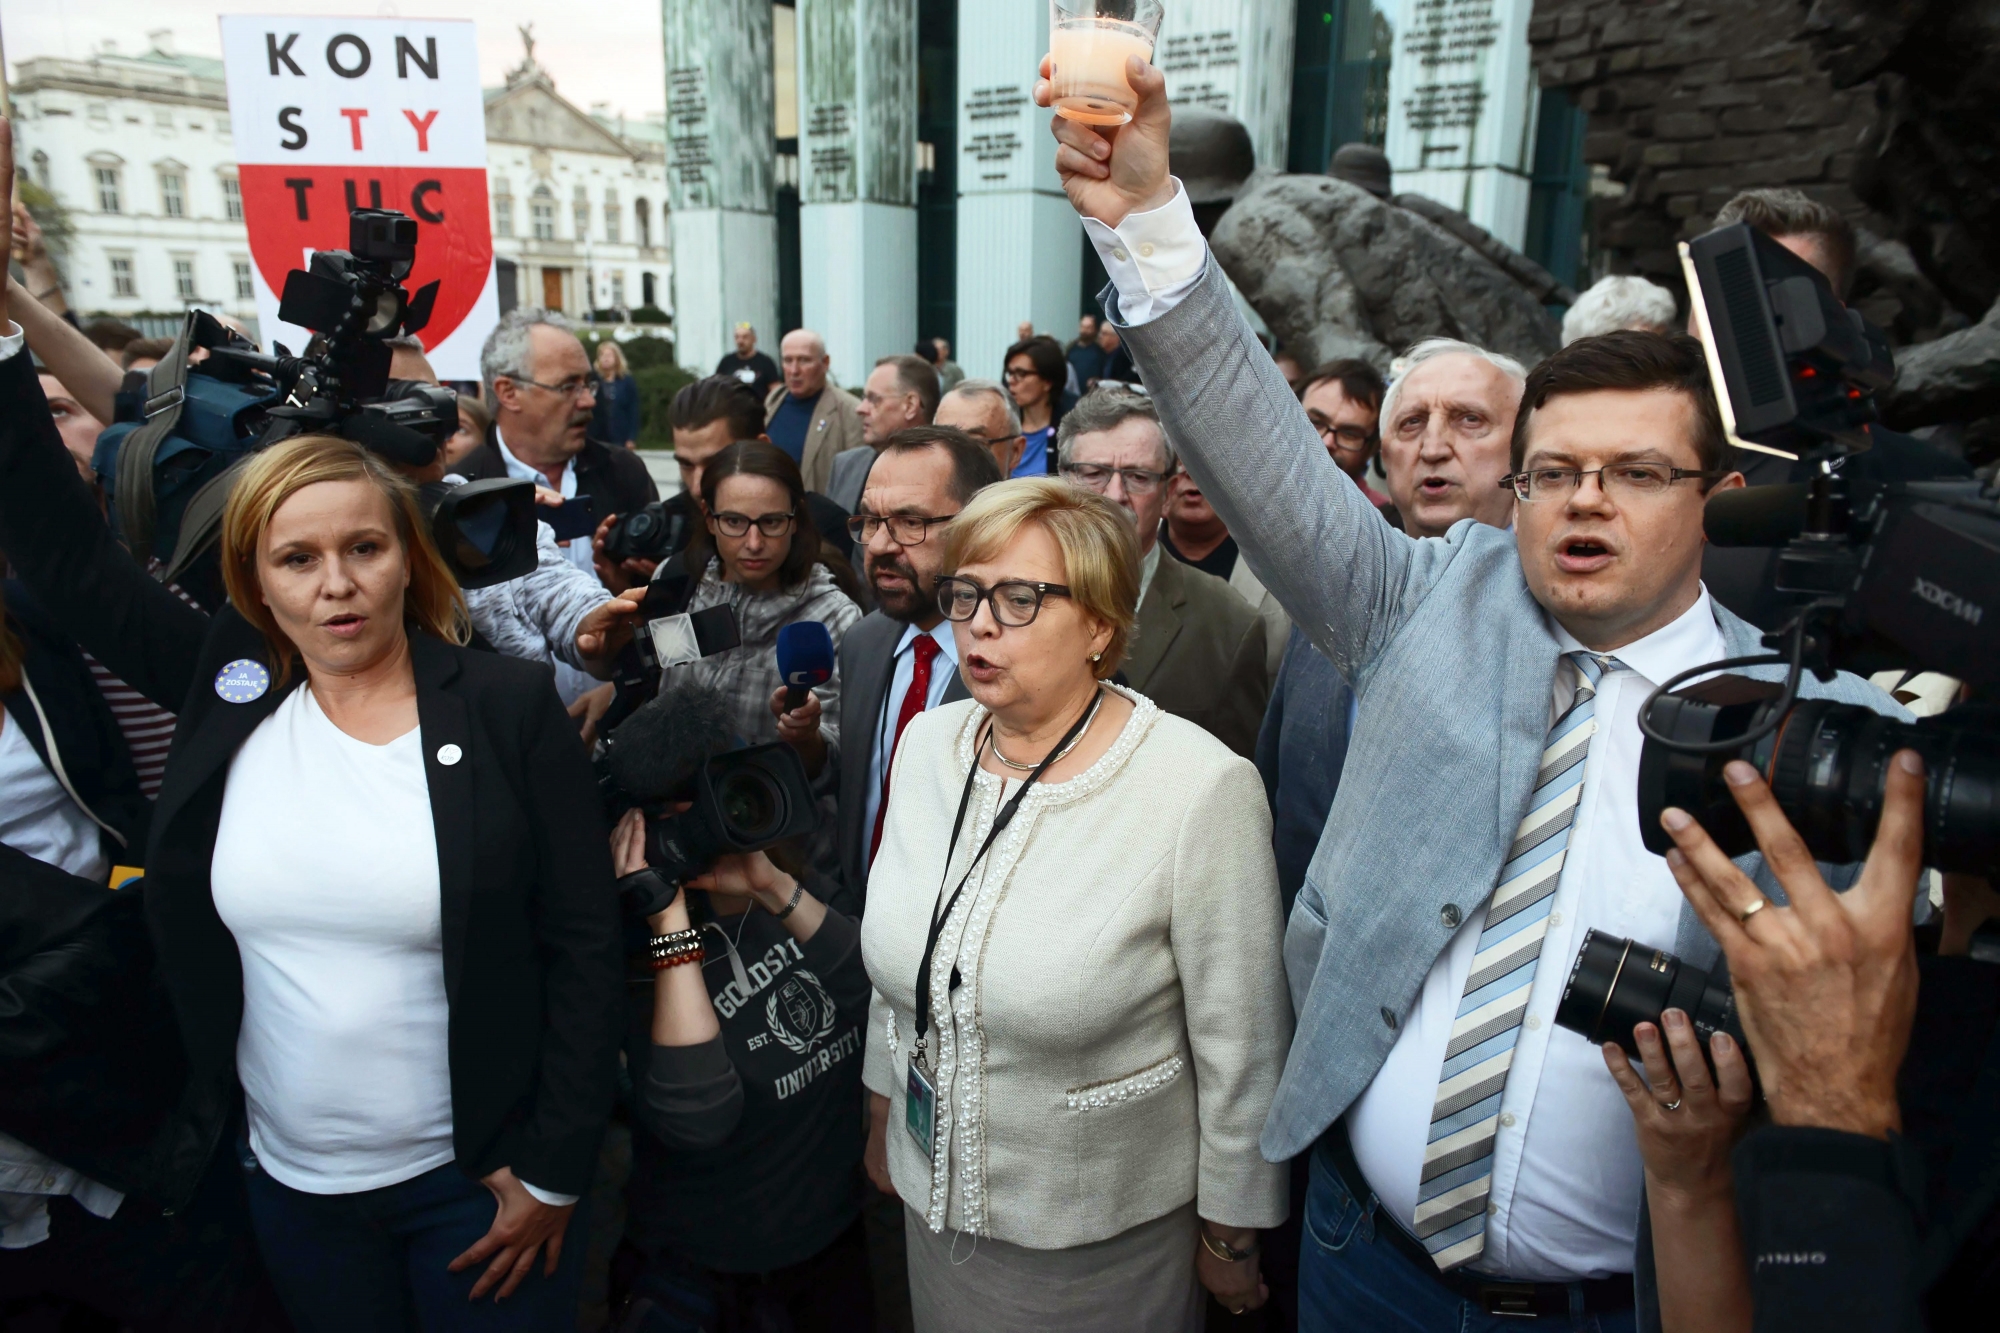 epa06863625 President of the Supreme Court Malgorzata Gersdorf (C) attends the demonstration, organized by opponents of the judicial reform in front of the seat of the Supreme Court in Warsaw, Poland, 03 July 2018 (issued 04 July 2018). The protesters are opposed to the amendment of the Act on the Supreme Court, according to which judges who turned 65 are retired. The retirement of Supreme Court First President Malgorzata Gersdorf is in line with binding laws, presidential aide Pawel Mucha argued on 03 July after a meeting attended among others by President Andrzej Duda and Gersdorf.  EPA/JAKUB KAMINSKI POLAND OUT POLAND PROTEST JUDICIARY